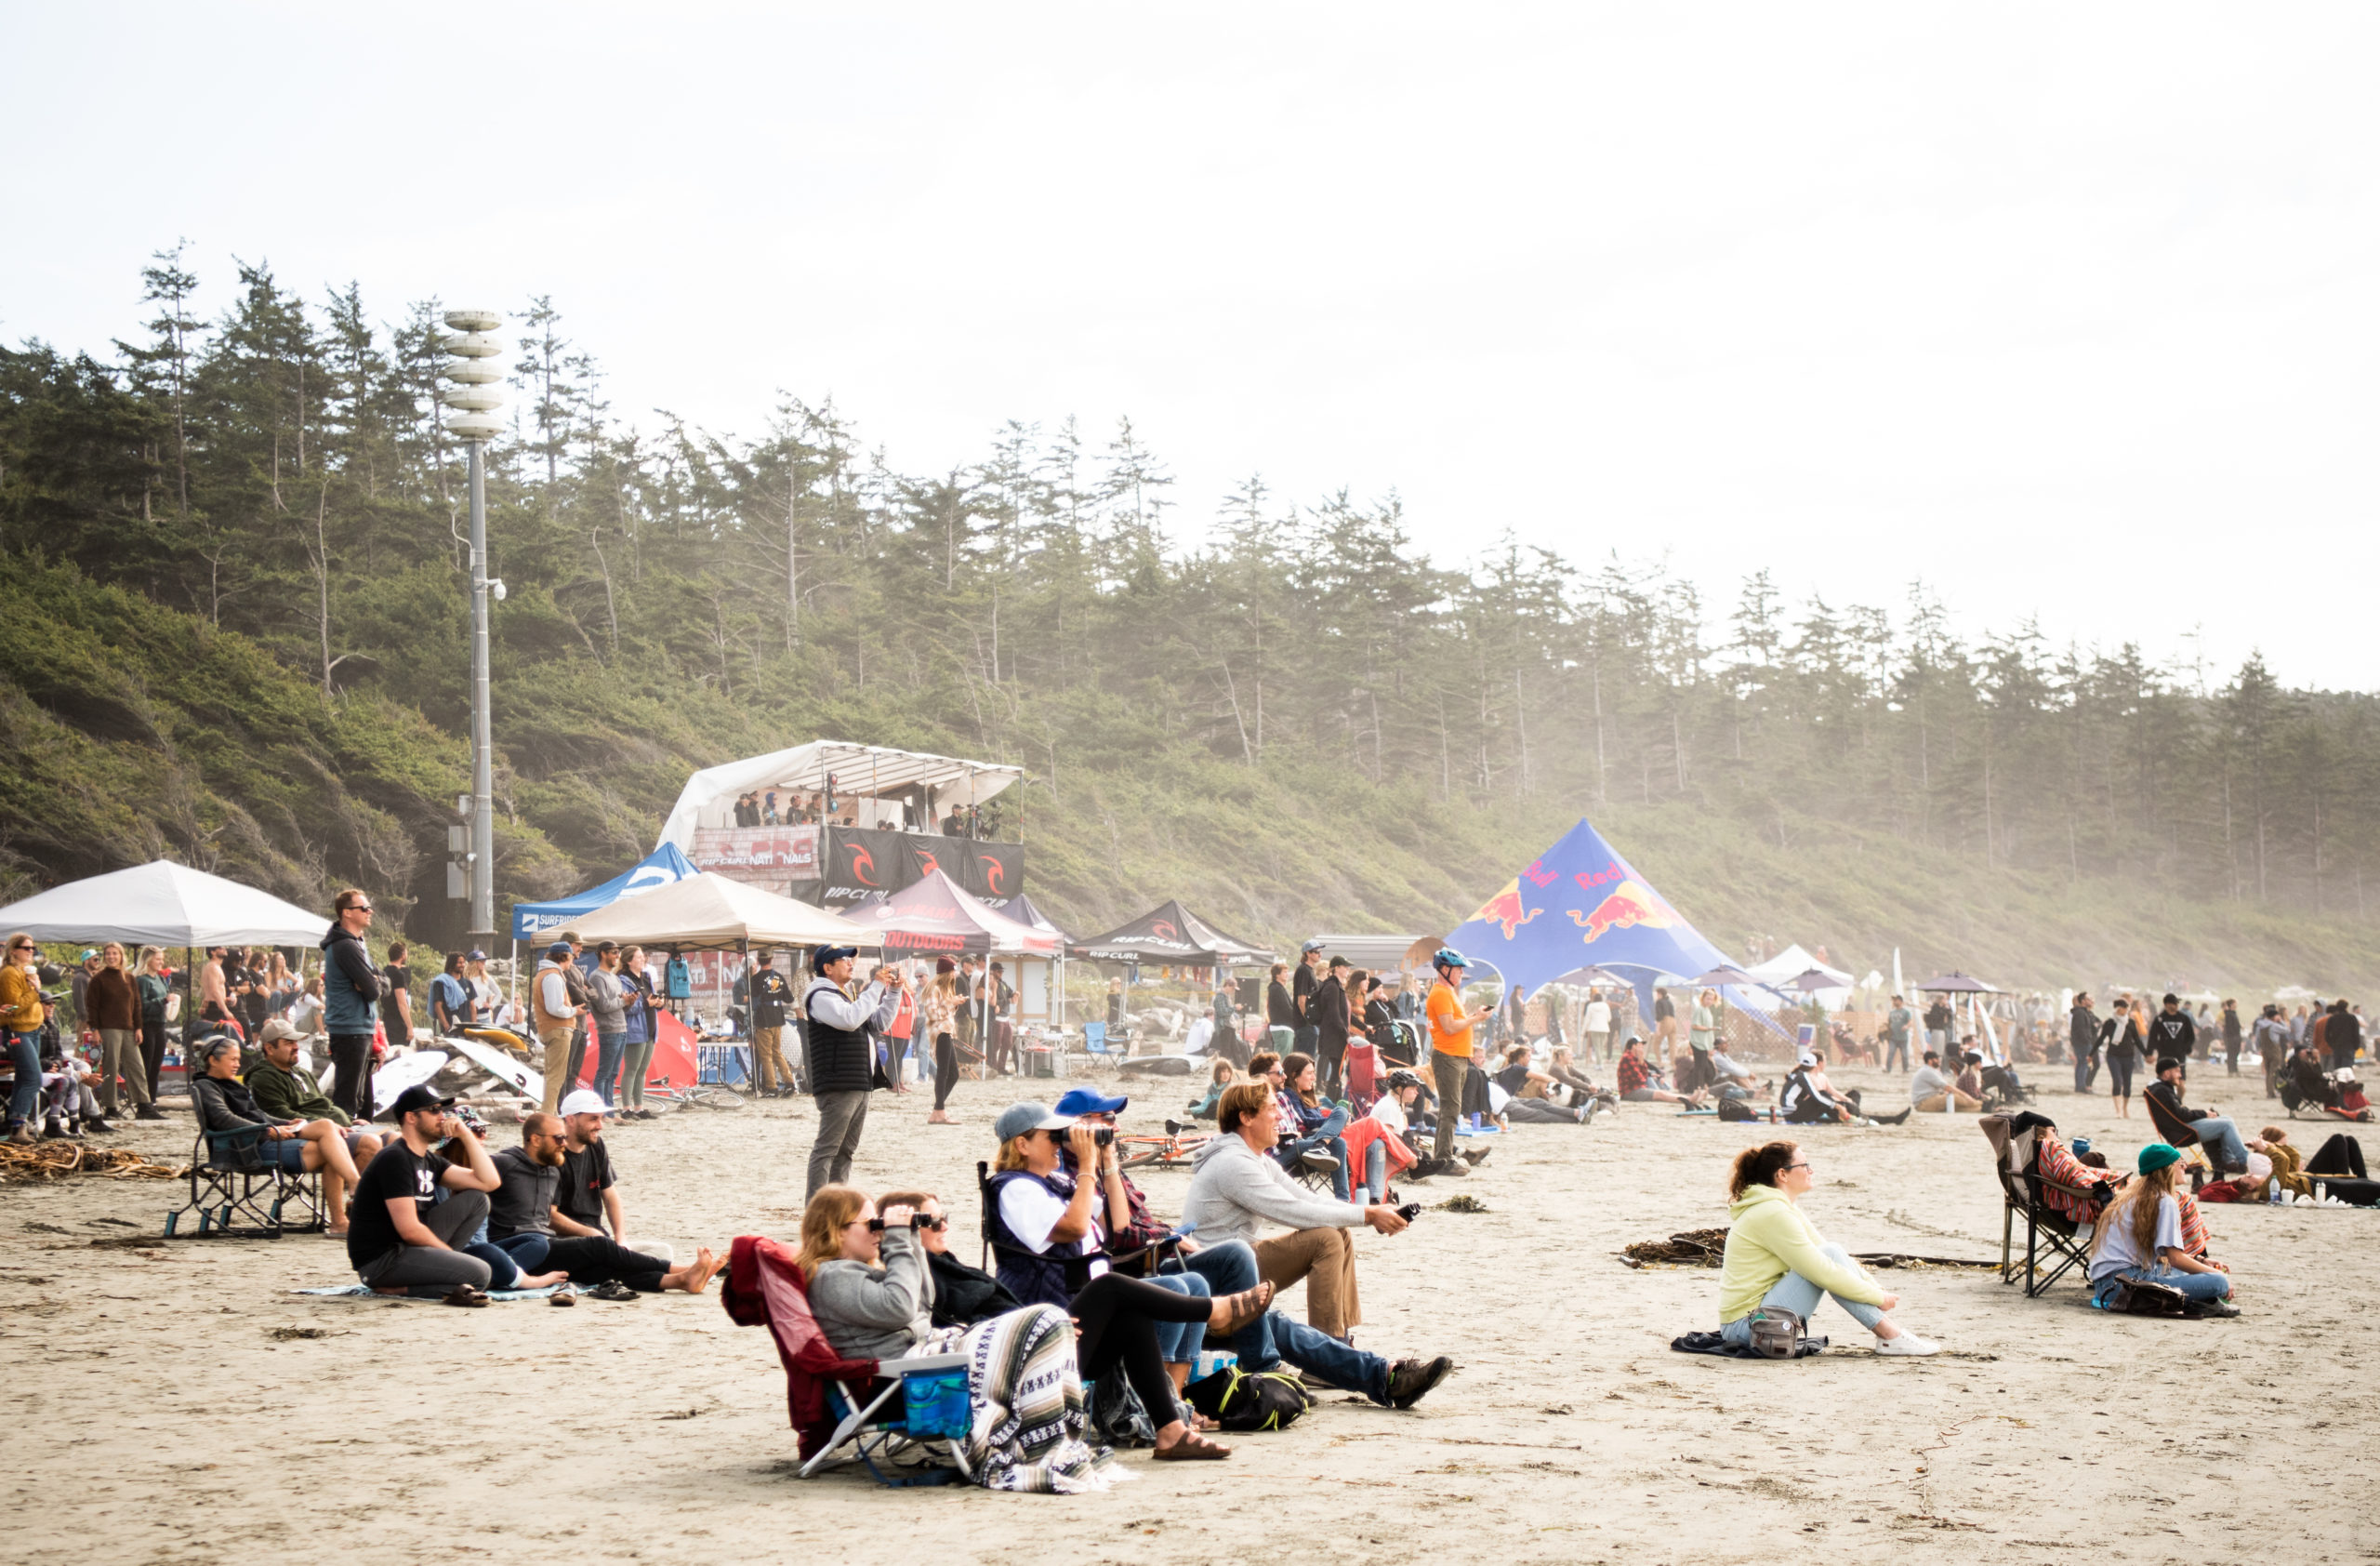 Surf competition spectators at the Rip Curl Pro in Tofino, British Columbia